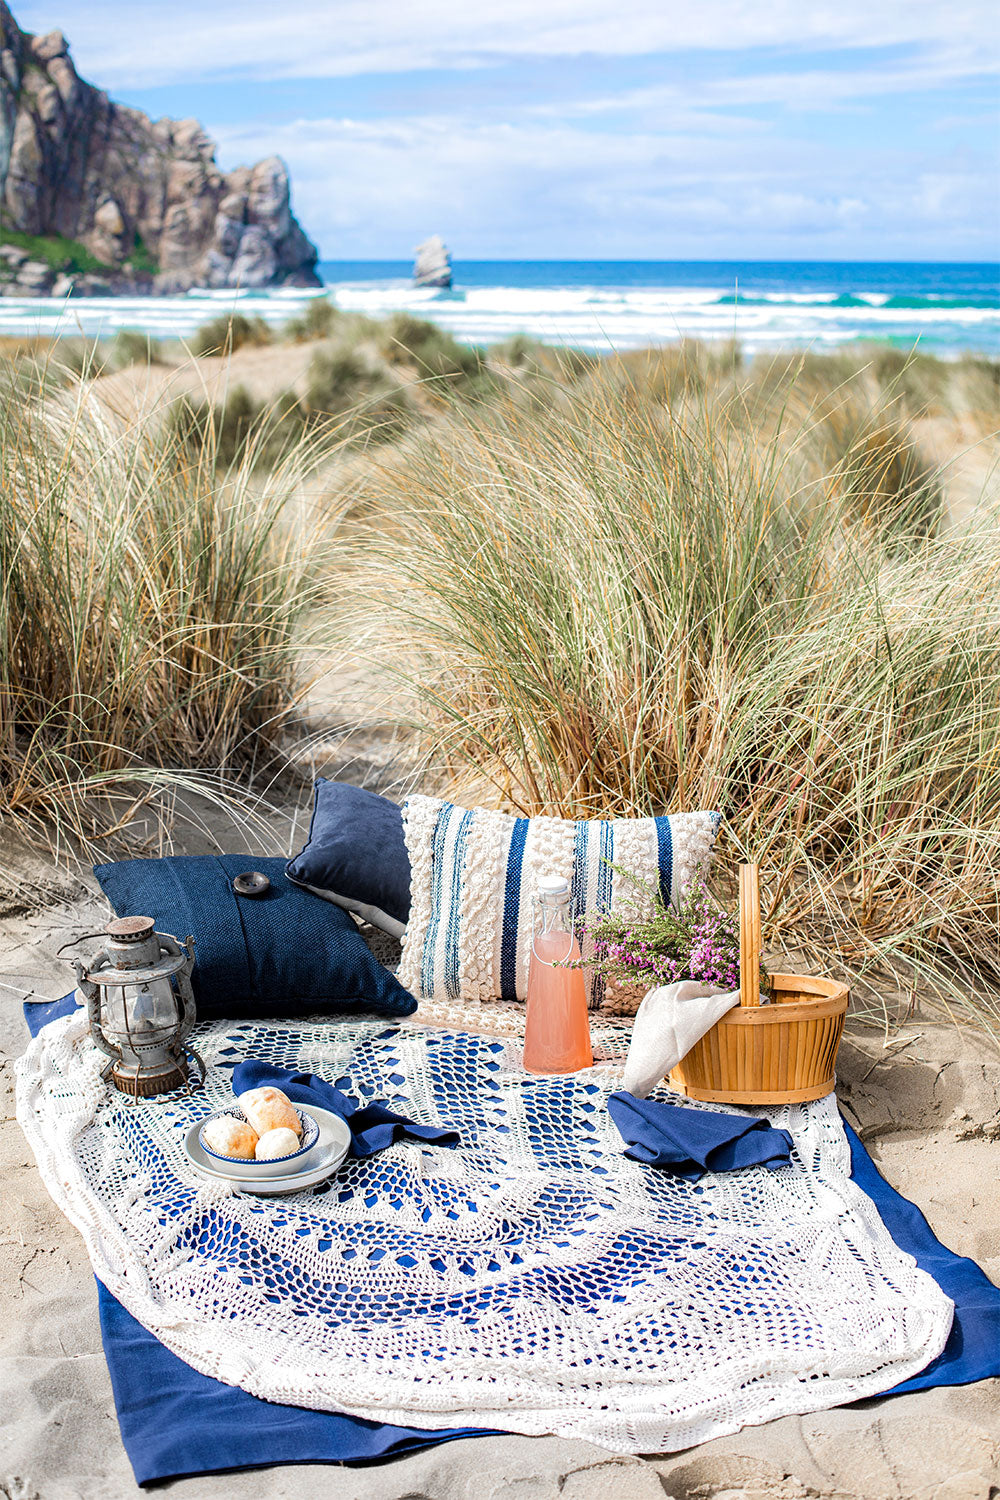 How to Pack the Perfect Beach Picnic – Panama Jack®